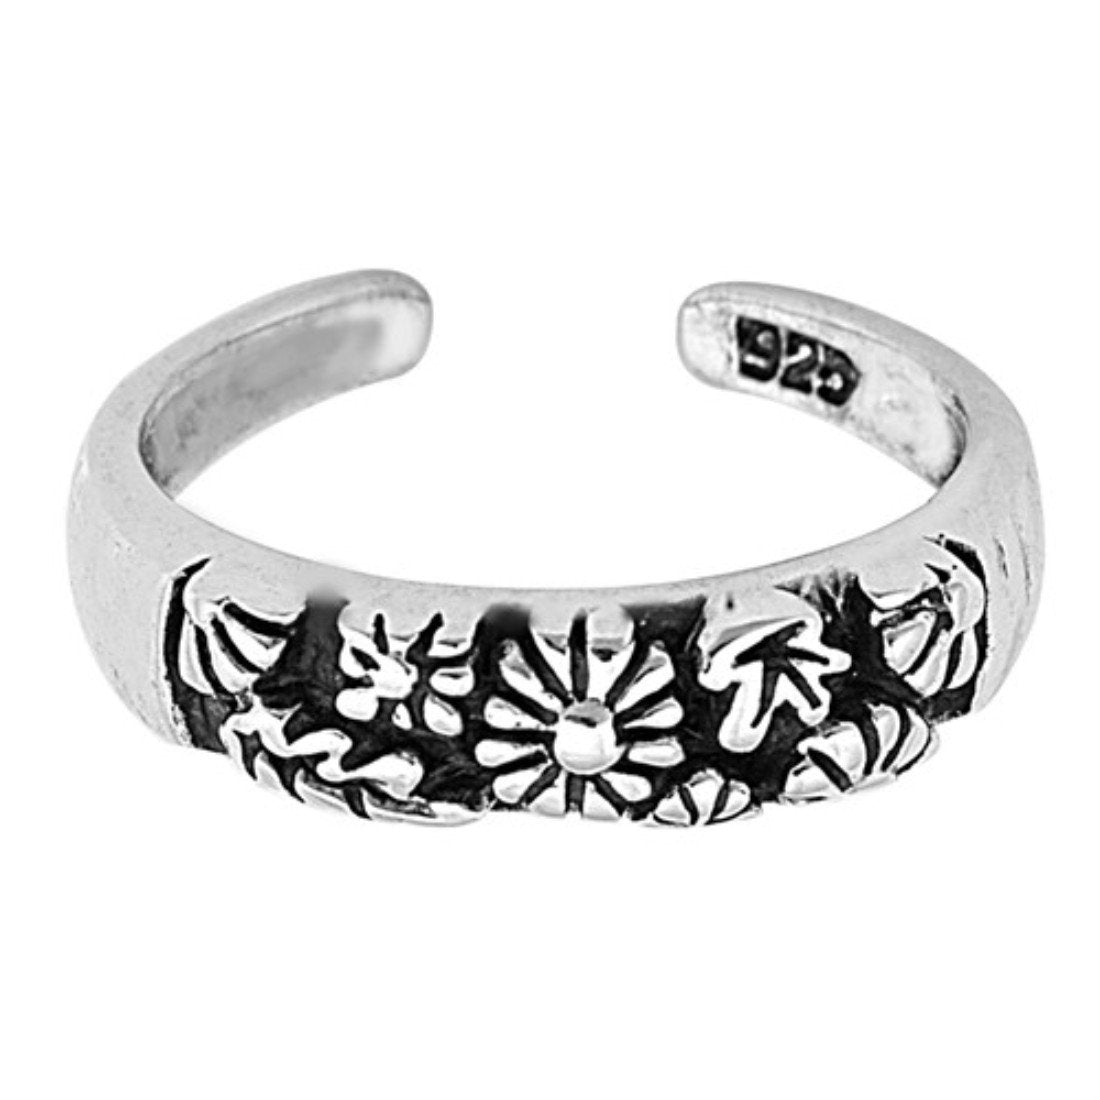 Flowers Toe Ring Adjustable Band Fashion Jewelry 925 Sterling Silver (4mm)